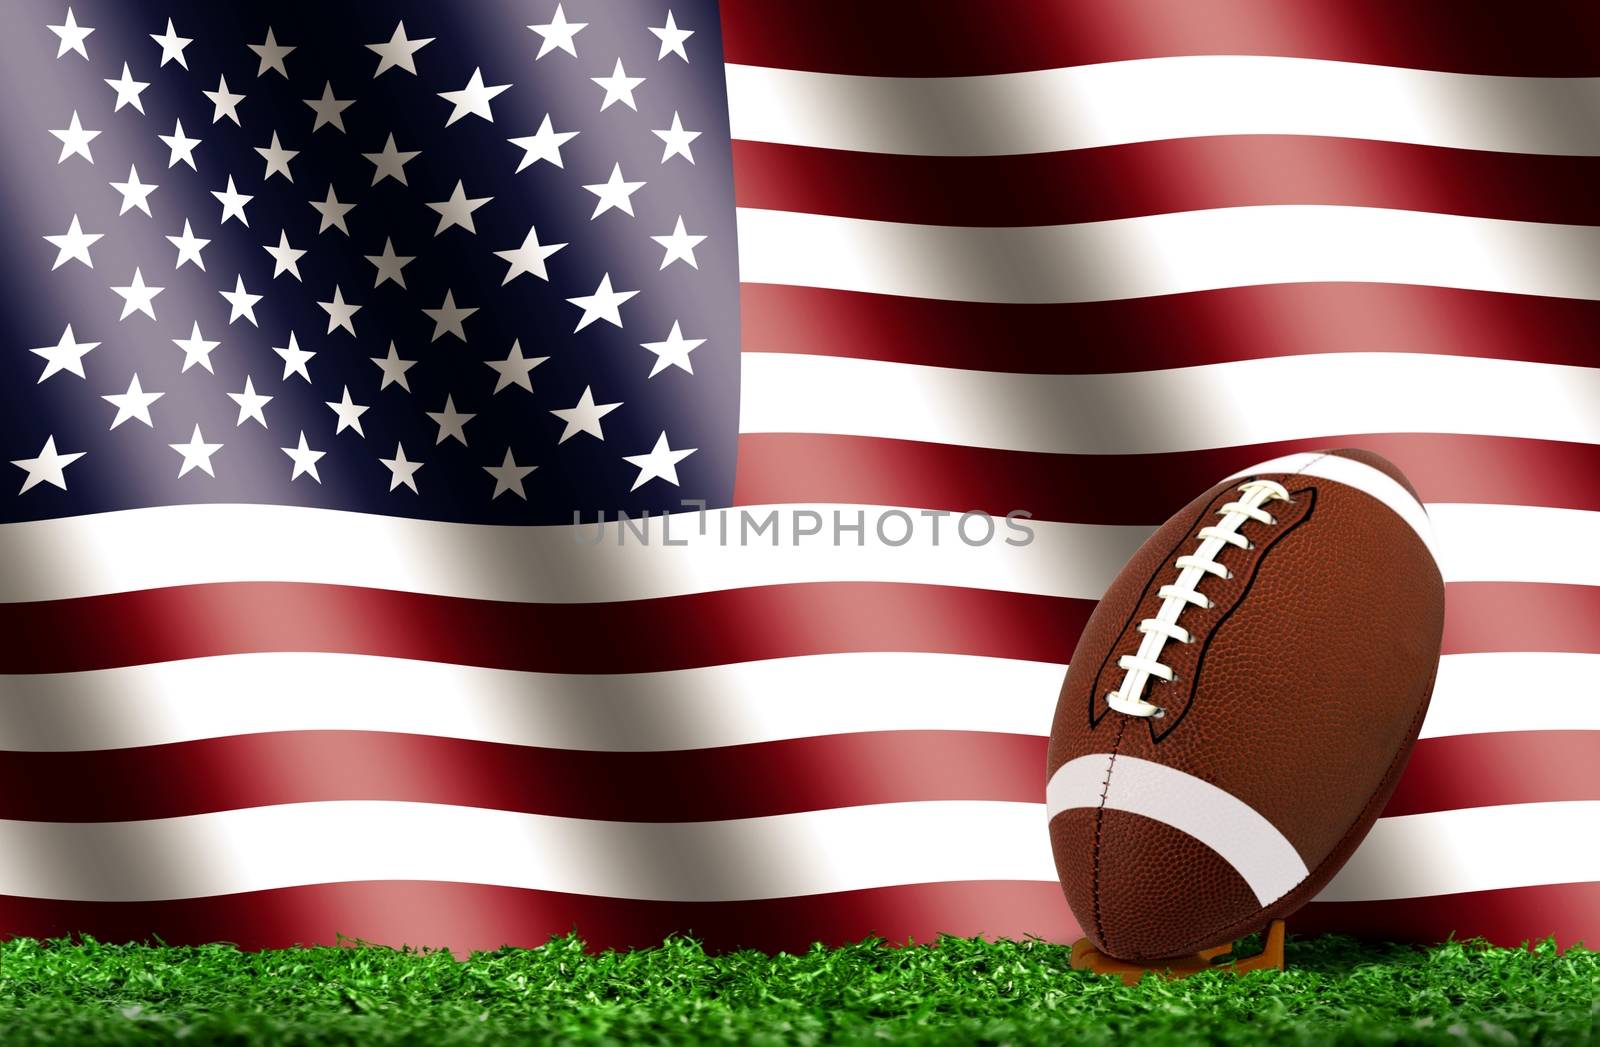 Football Ball on Grass with American Flag